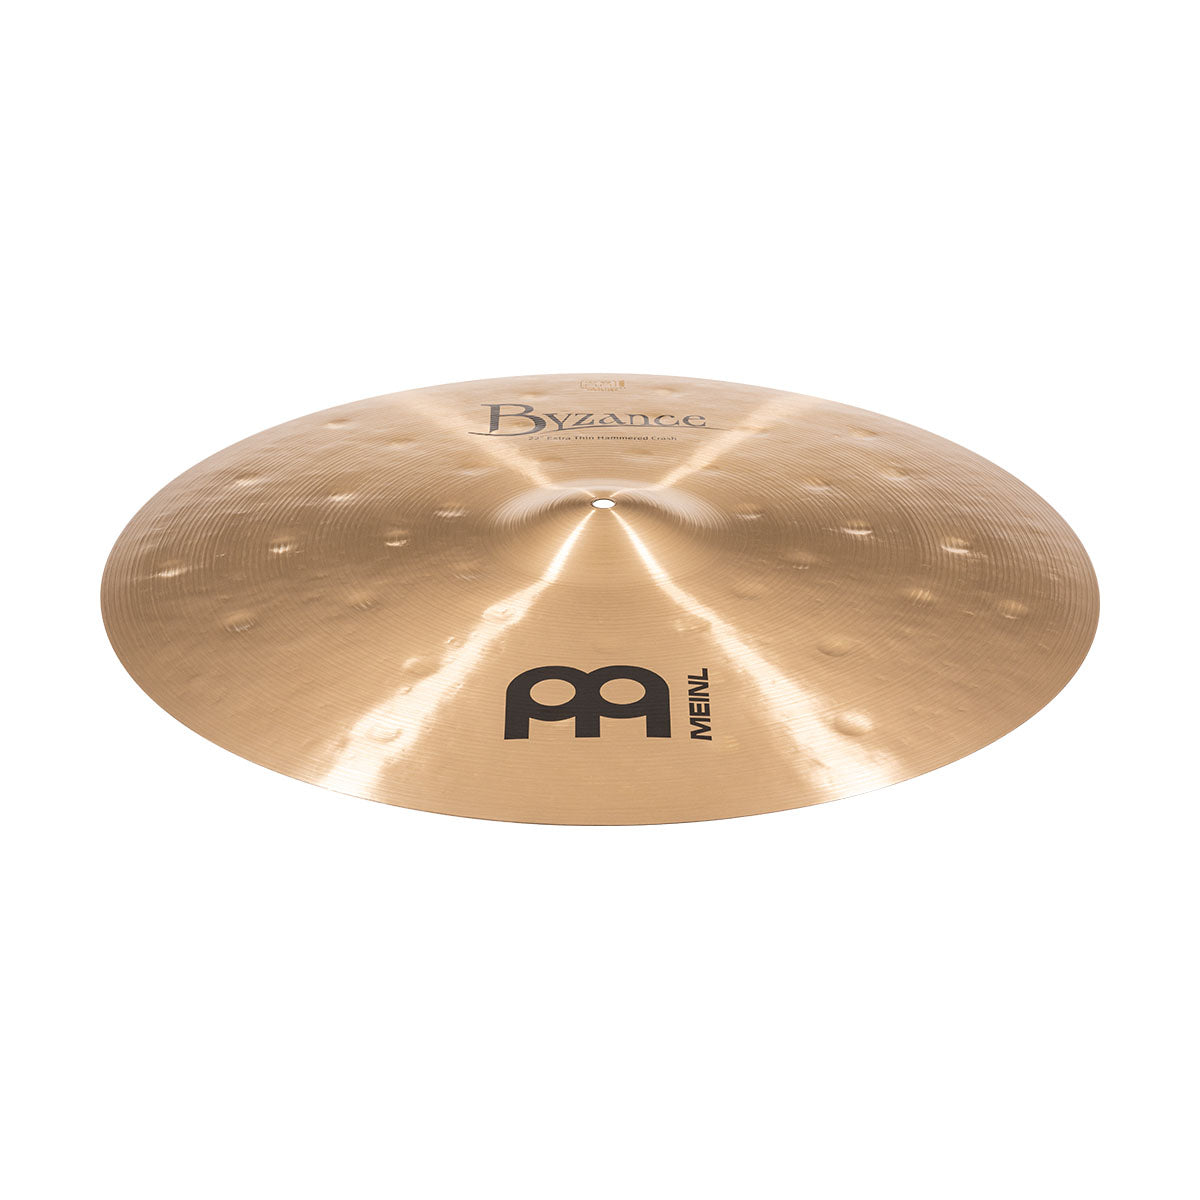 Meinl Byzance Traditional 22" Extra Thin Hammered Crash Cymbal